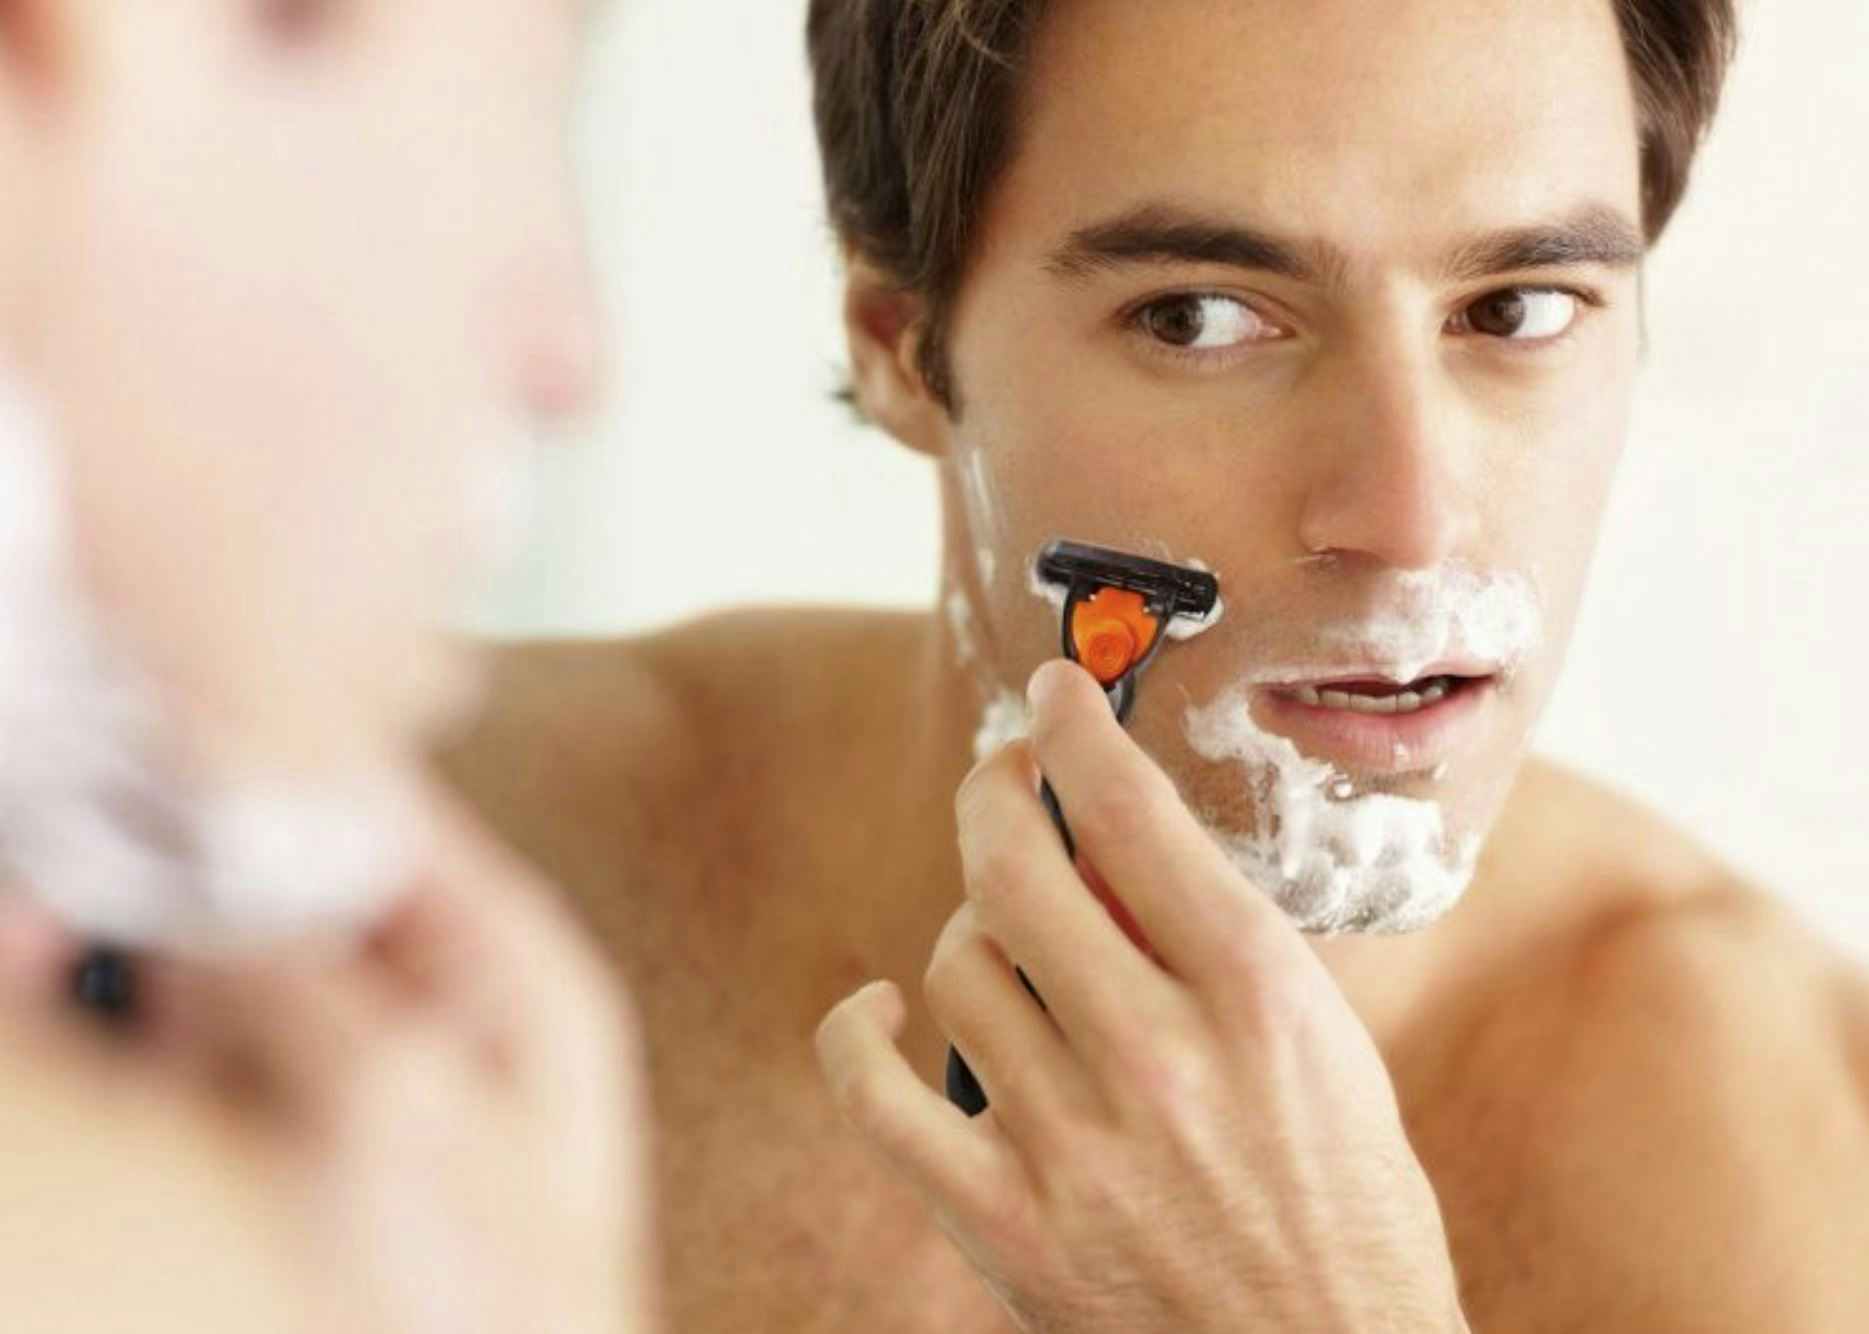 A man shaving his face with a Bic razor.